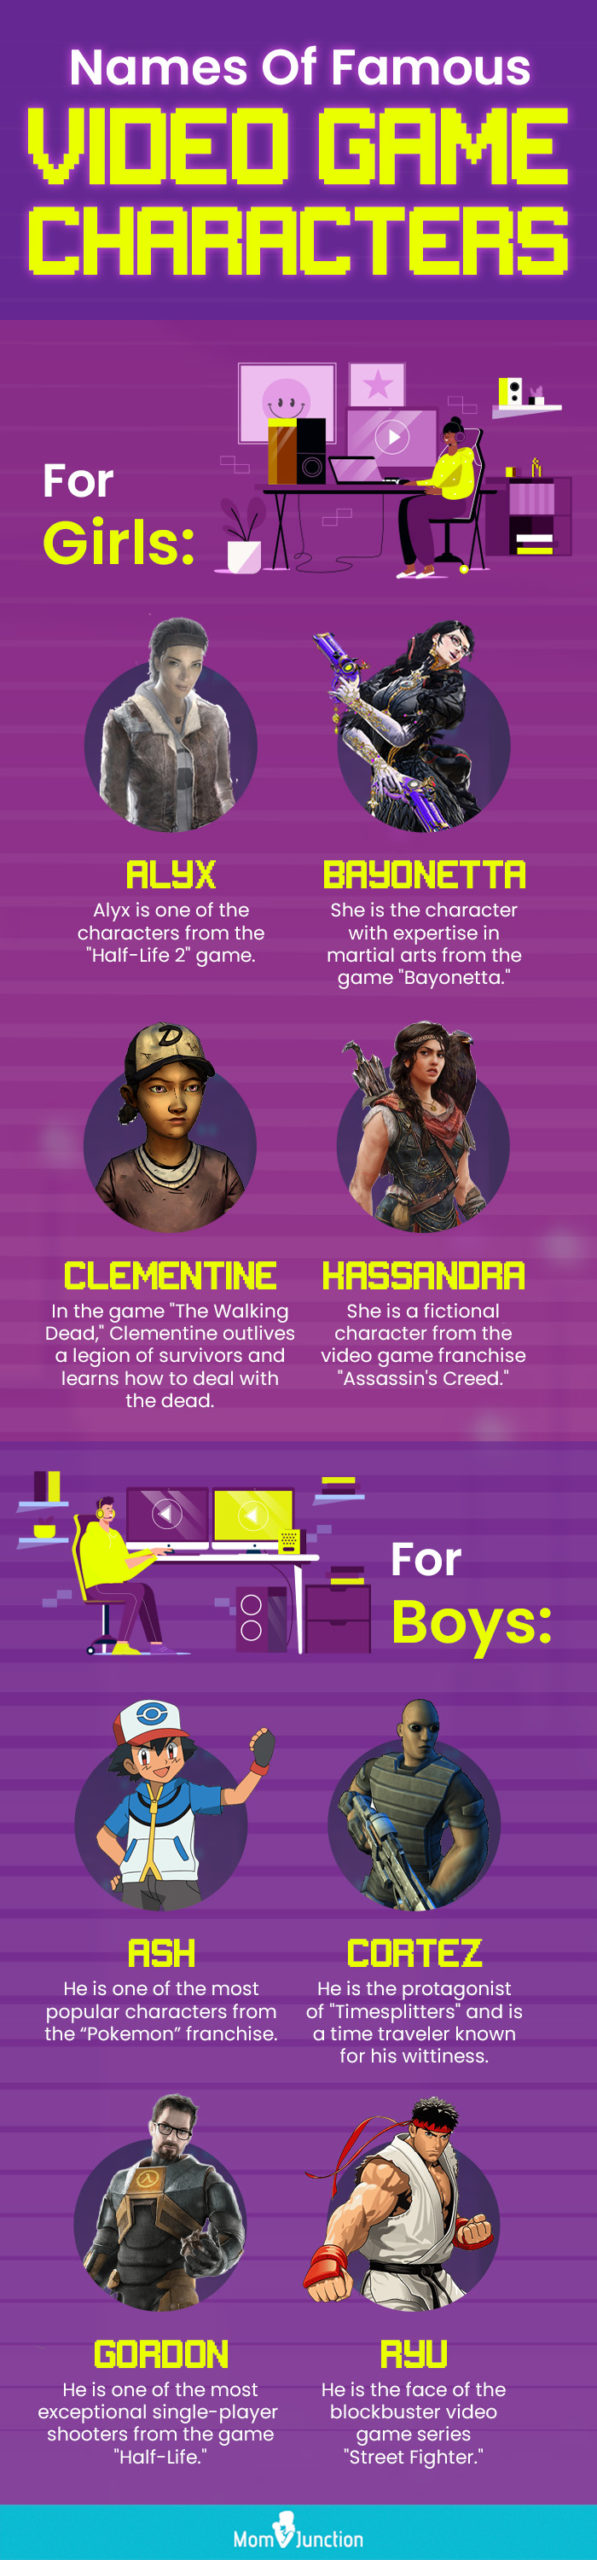 names of famous video game characters [infographic]